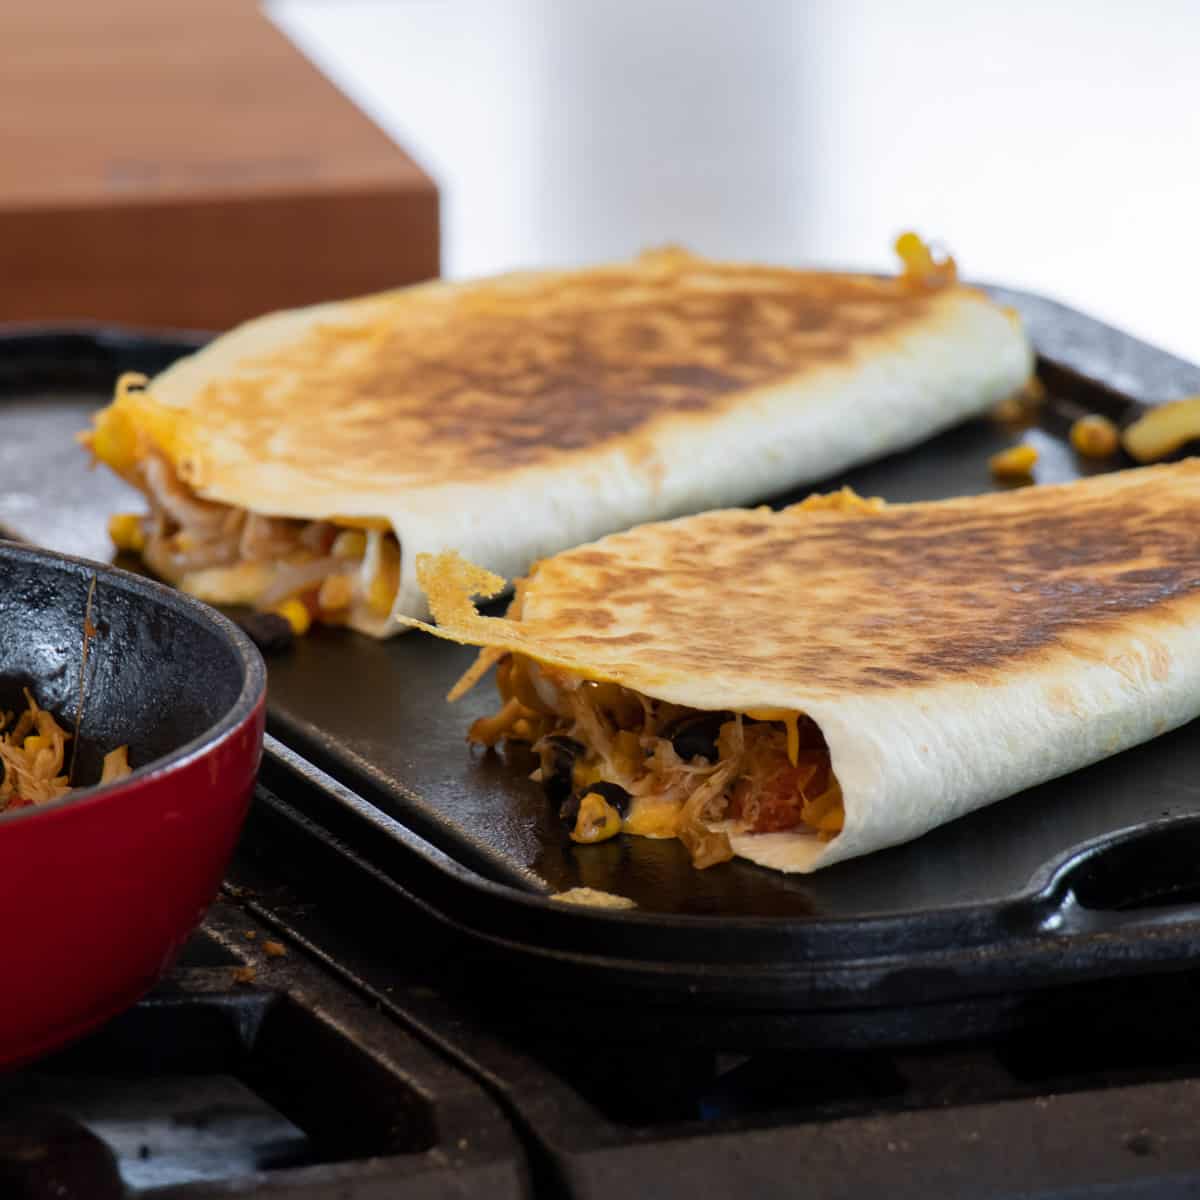 Cooked quesadilla on a griddle.